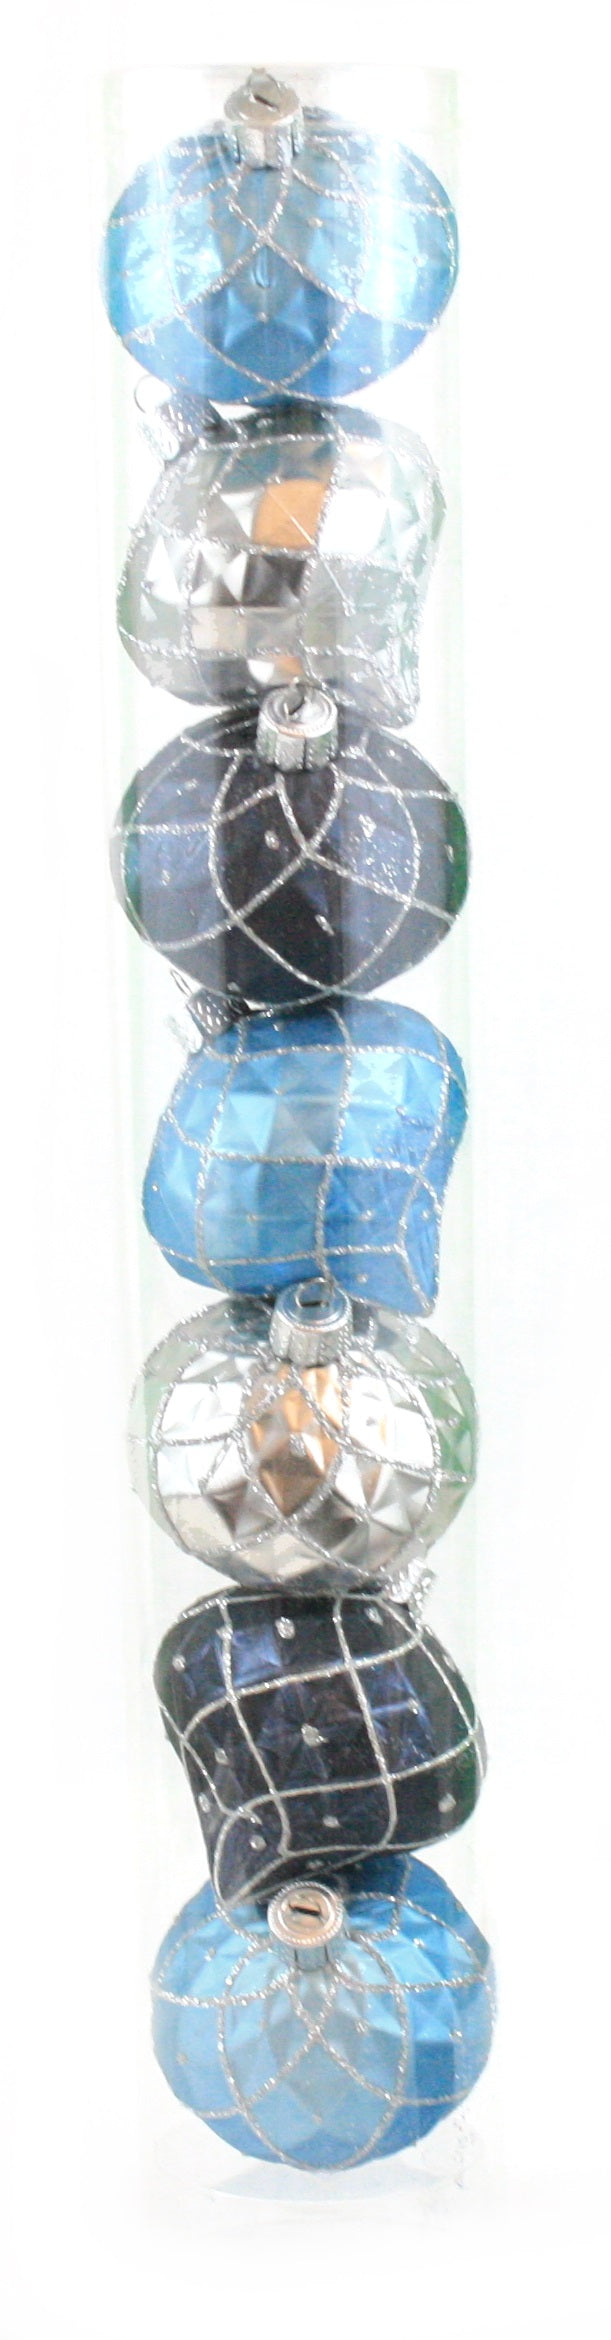 60mm Shatterproof Decorated Onion Ornaments - Blue/Charcoal